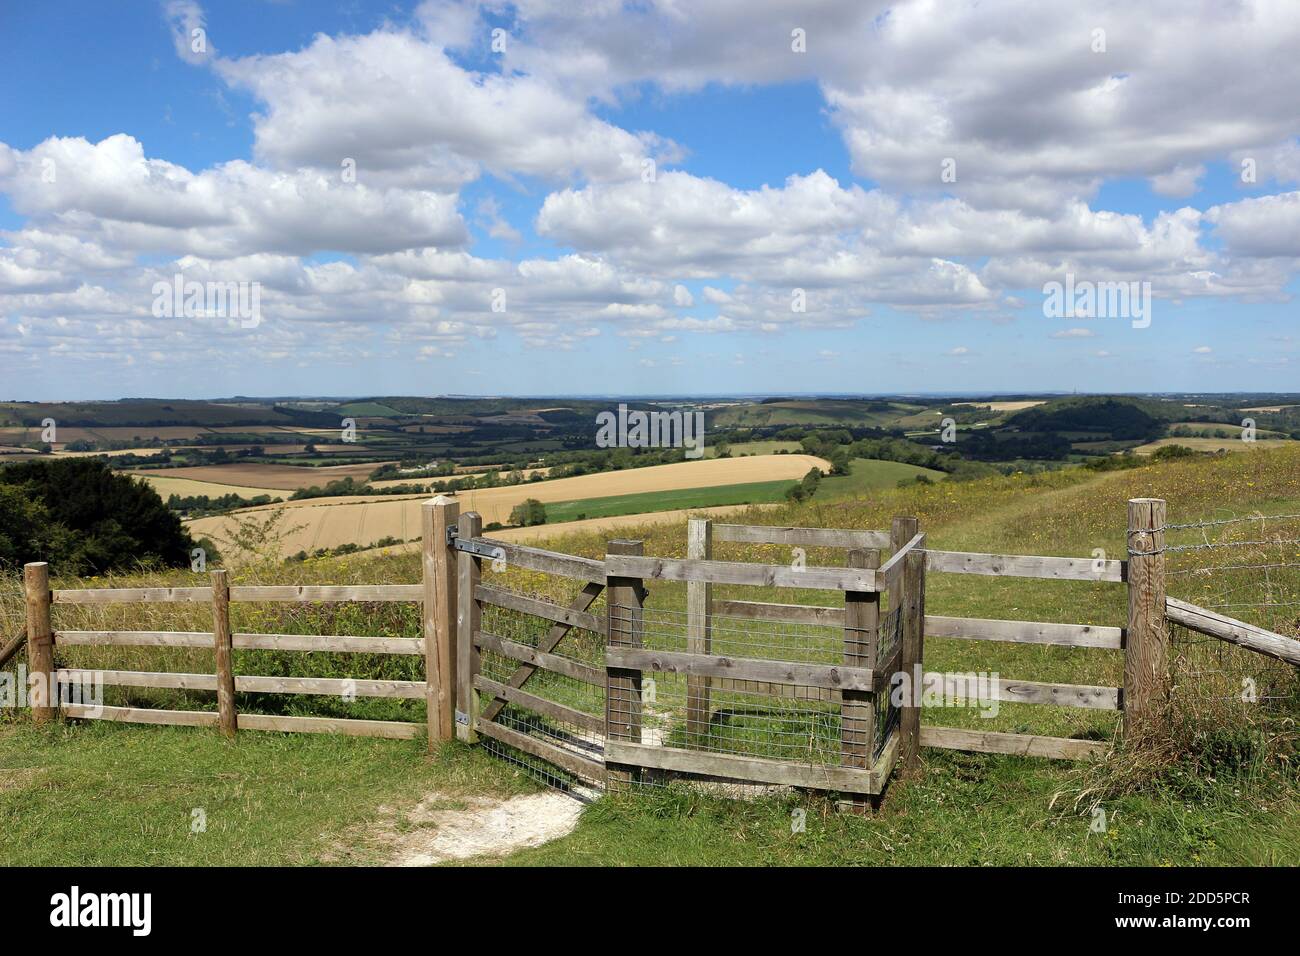 The South Downs National Park view with a wooden gate in the foreground Stock Photo